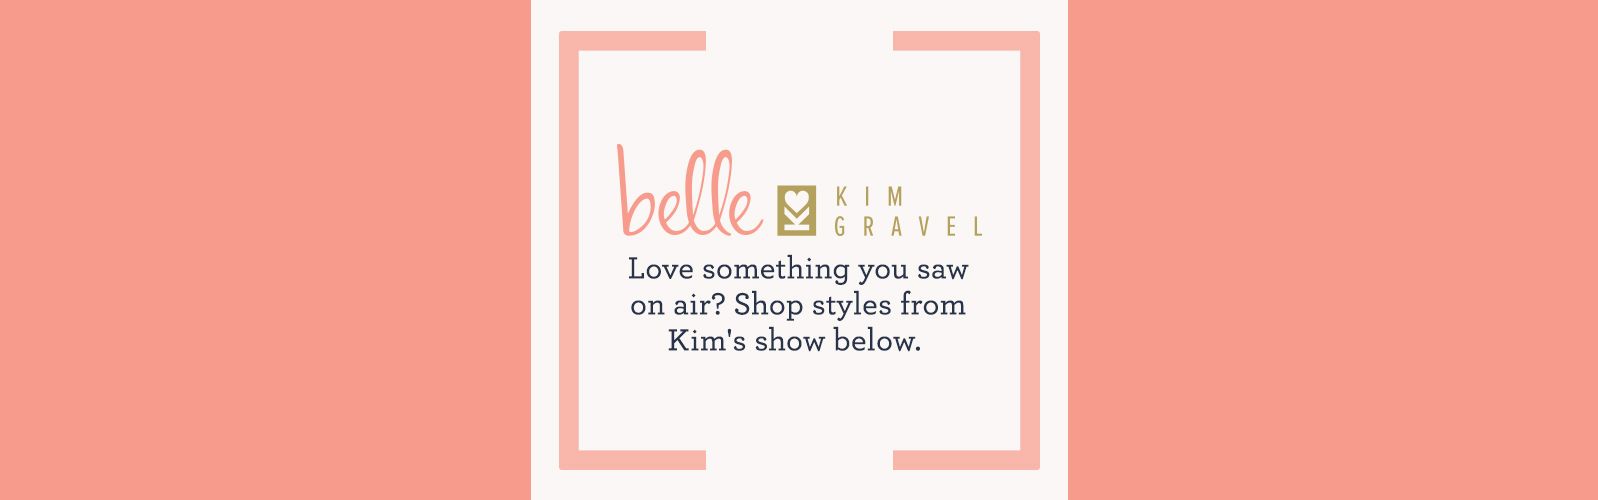 Belle by Kim Gravel Love something you saw on air? Shop styles from Kim's show below. 